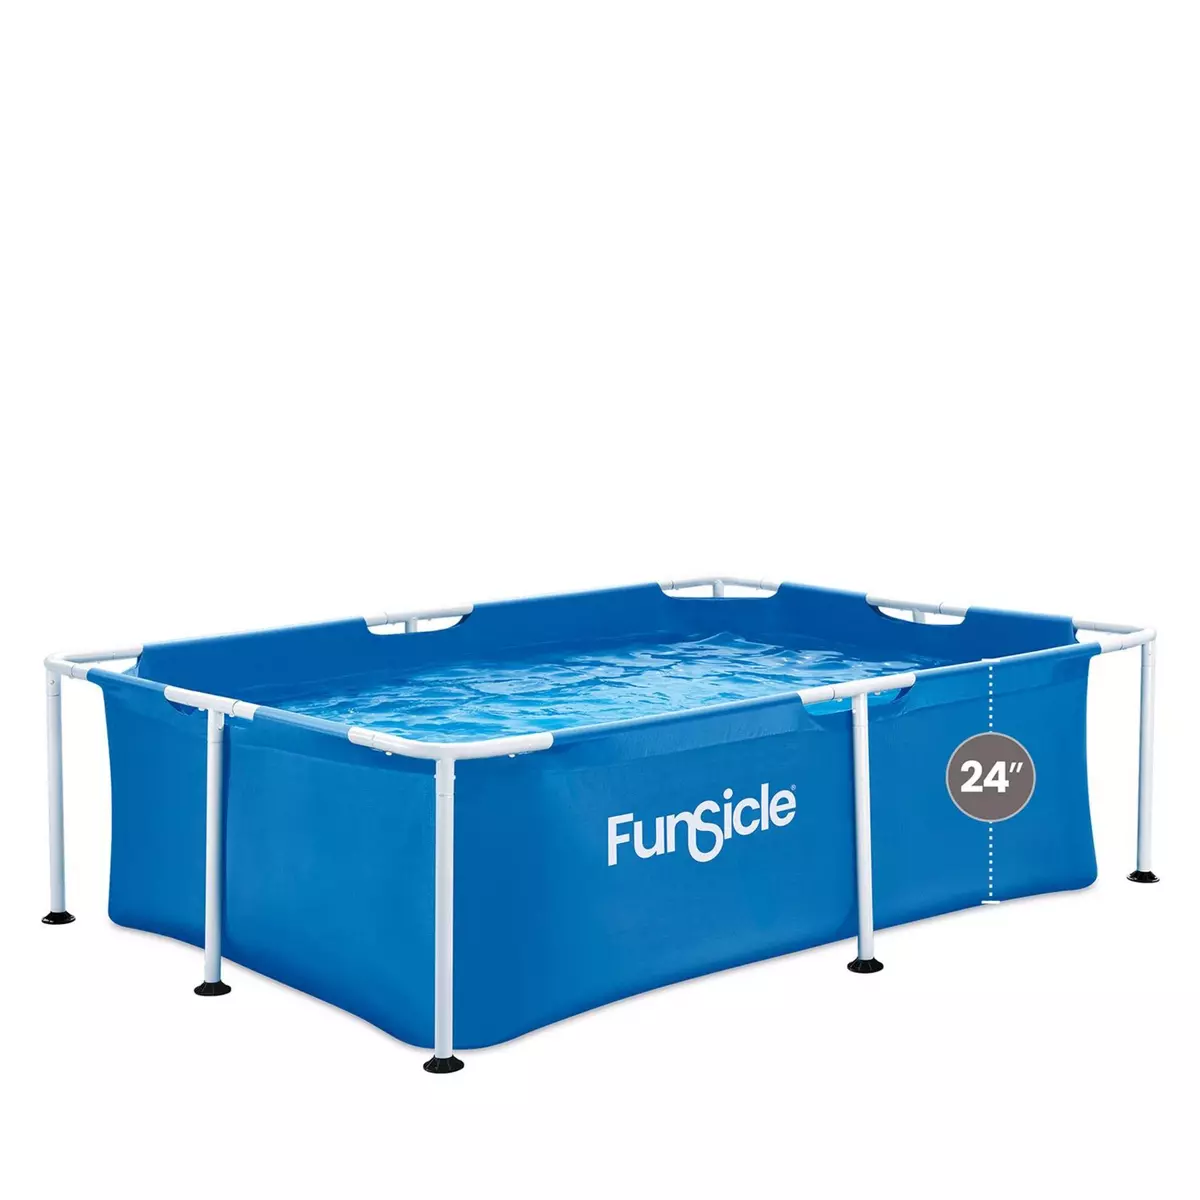 FUNSICLE Piscine tubulaire rectangulaire Funsicle  2,13 m x 1,52 m x 0,61 m